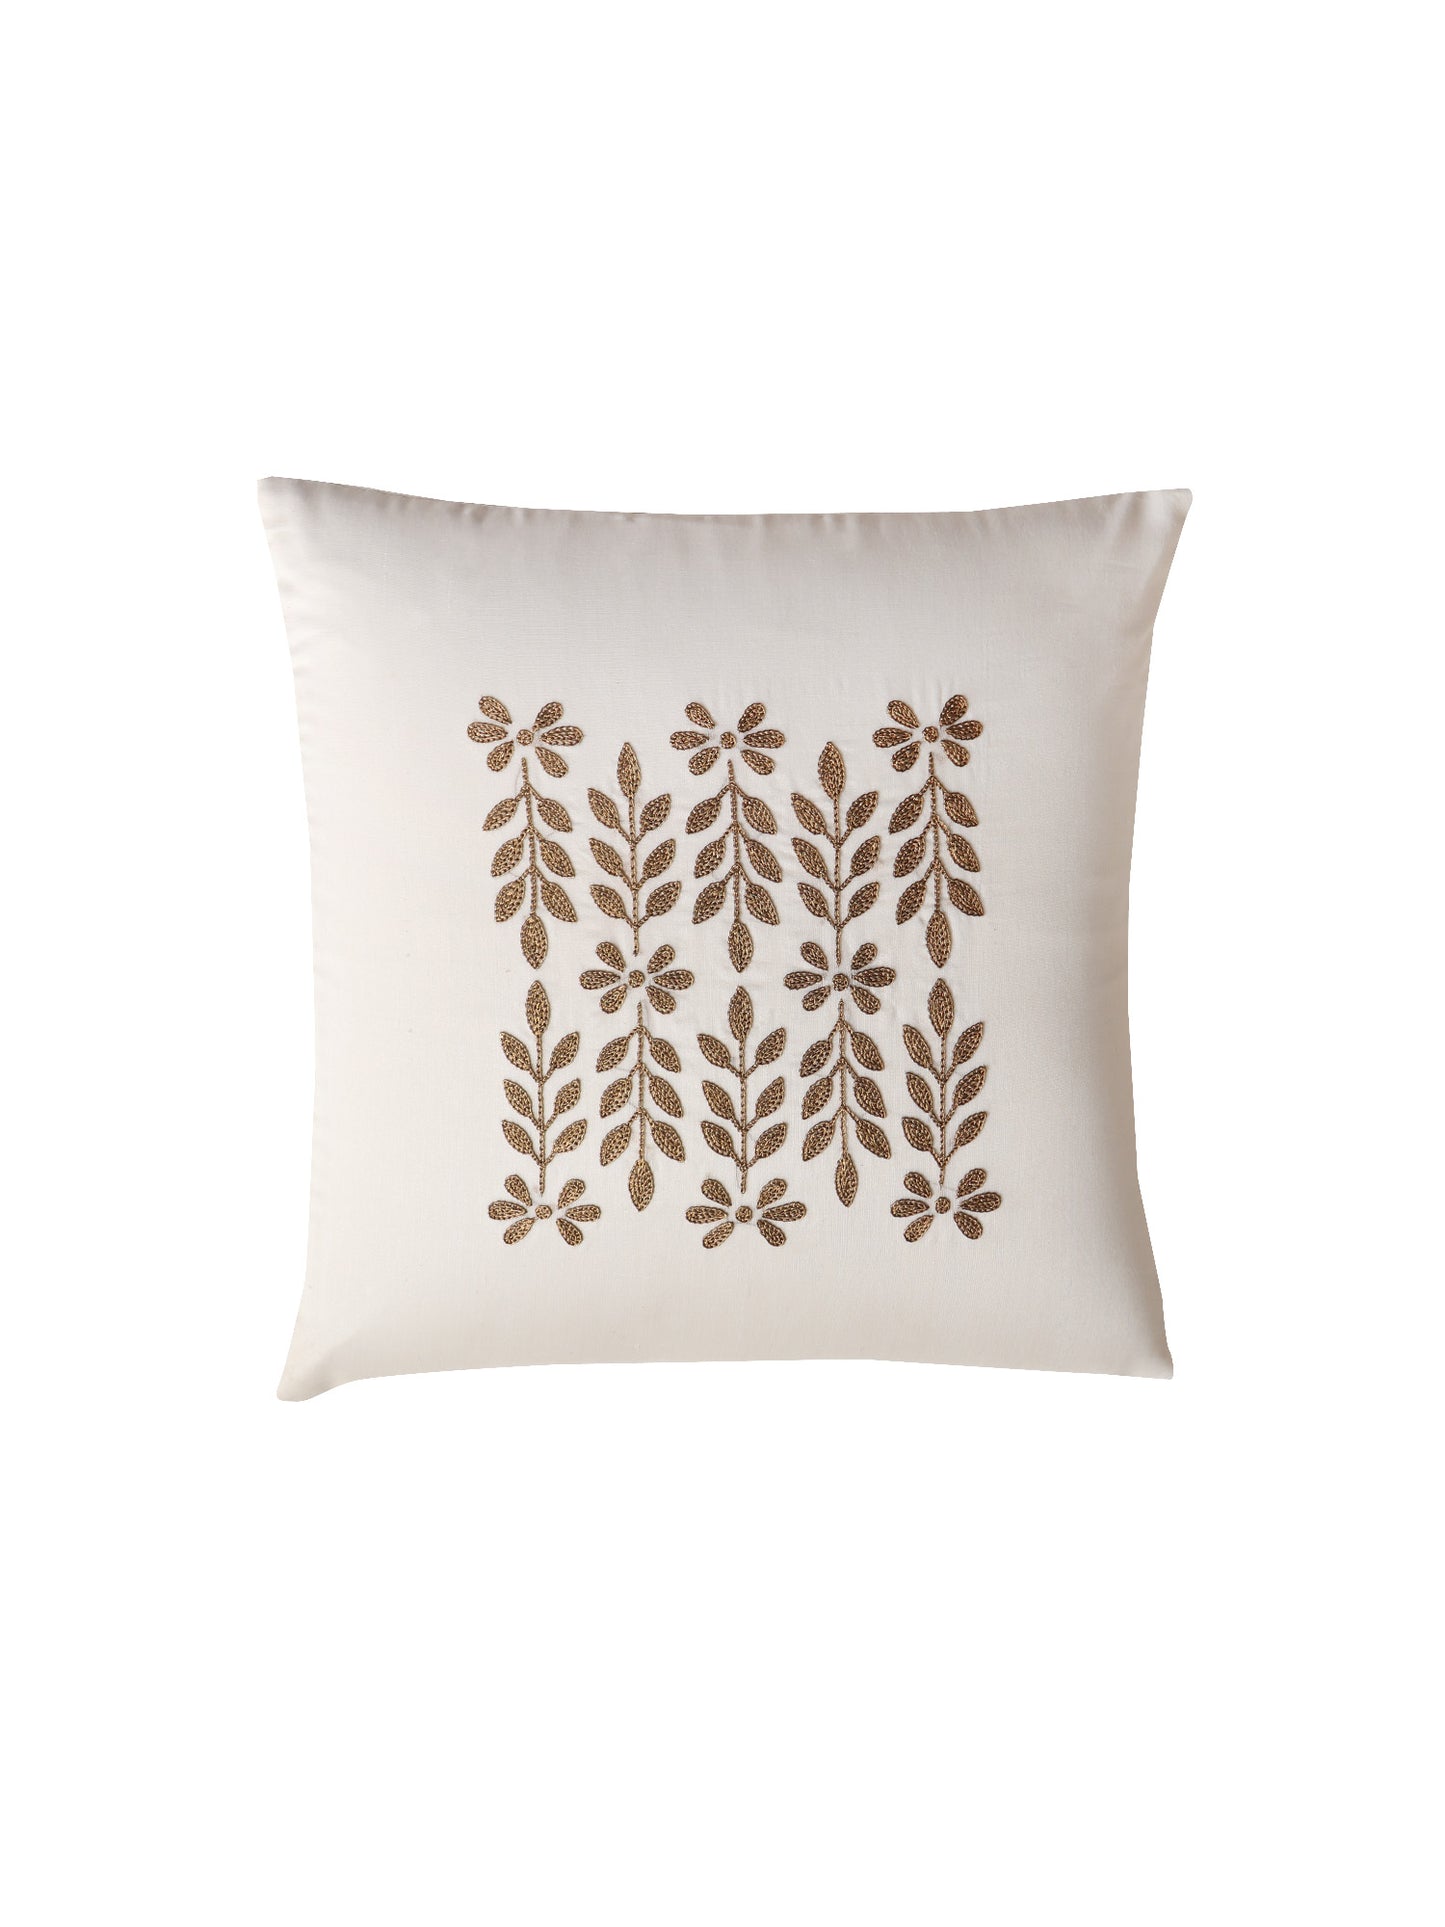 Hand Embroidered Cushion Cover Floral Beige - 16" x 16"